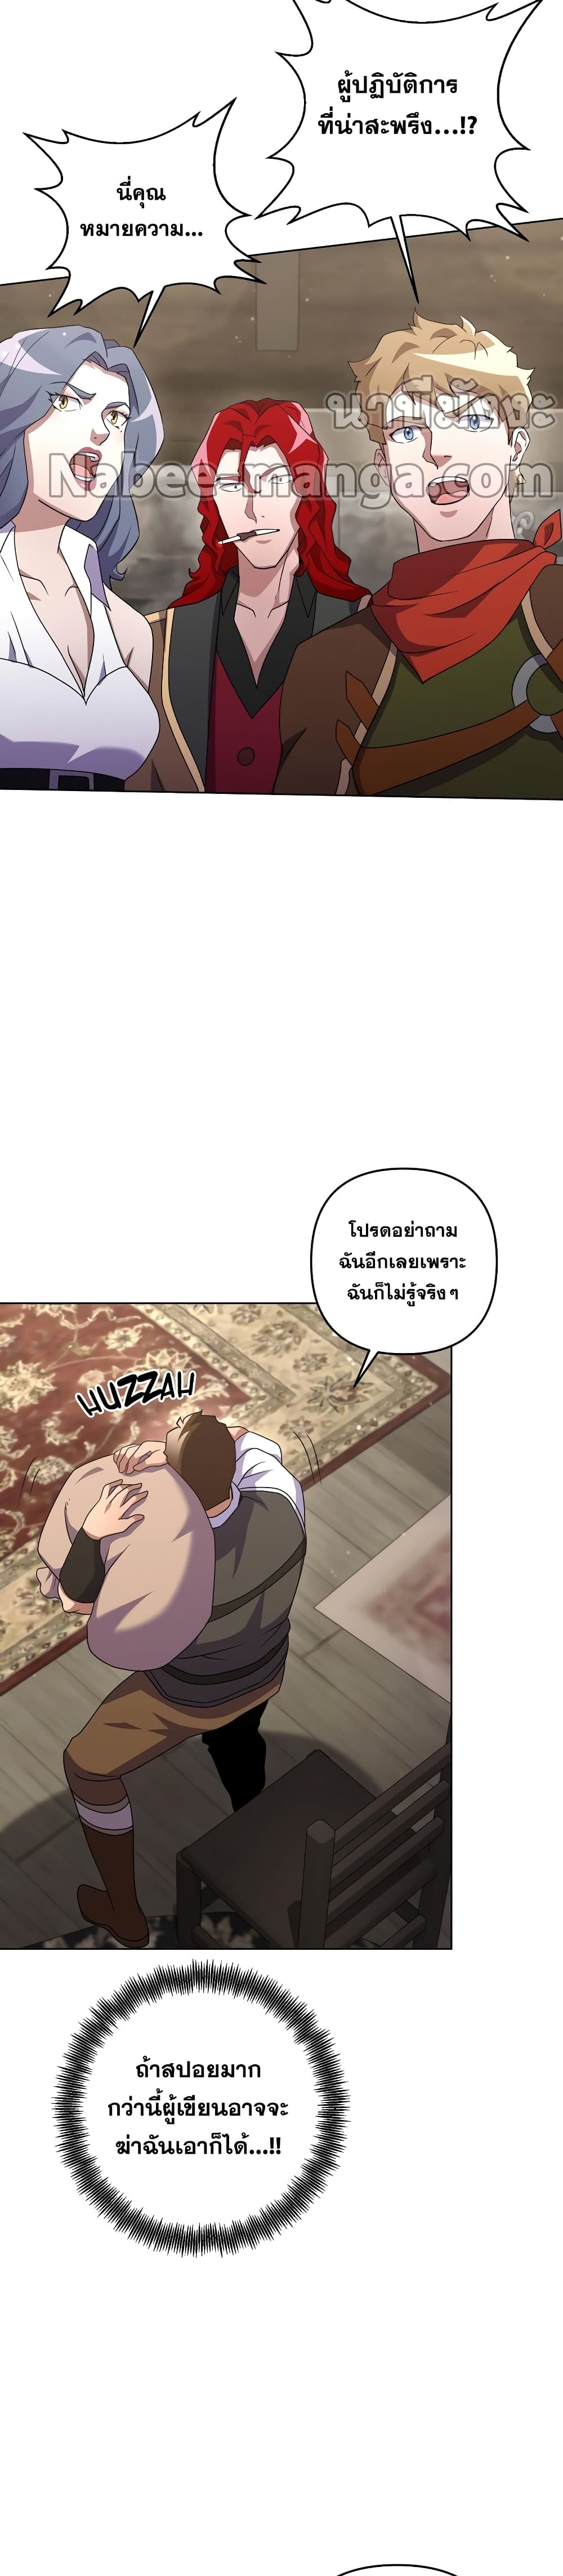 Surviving in an Action Manhwa 25-25